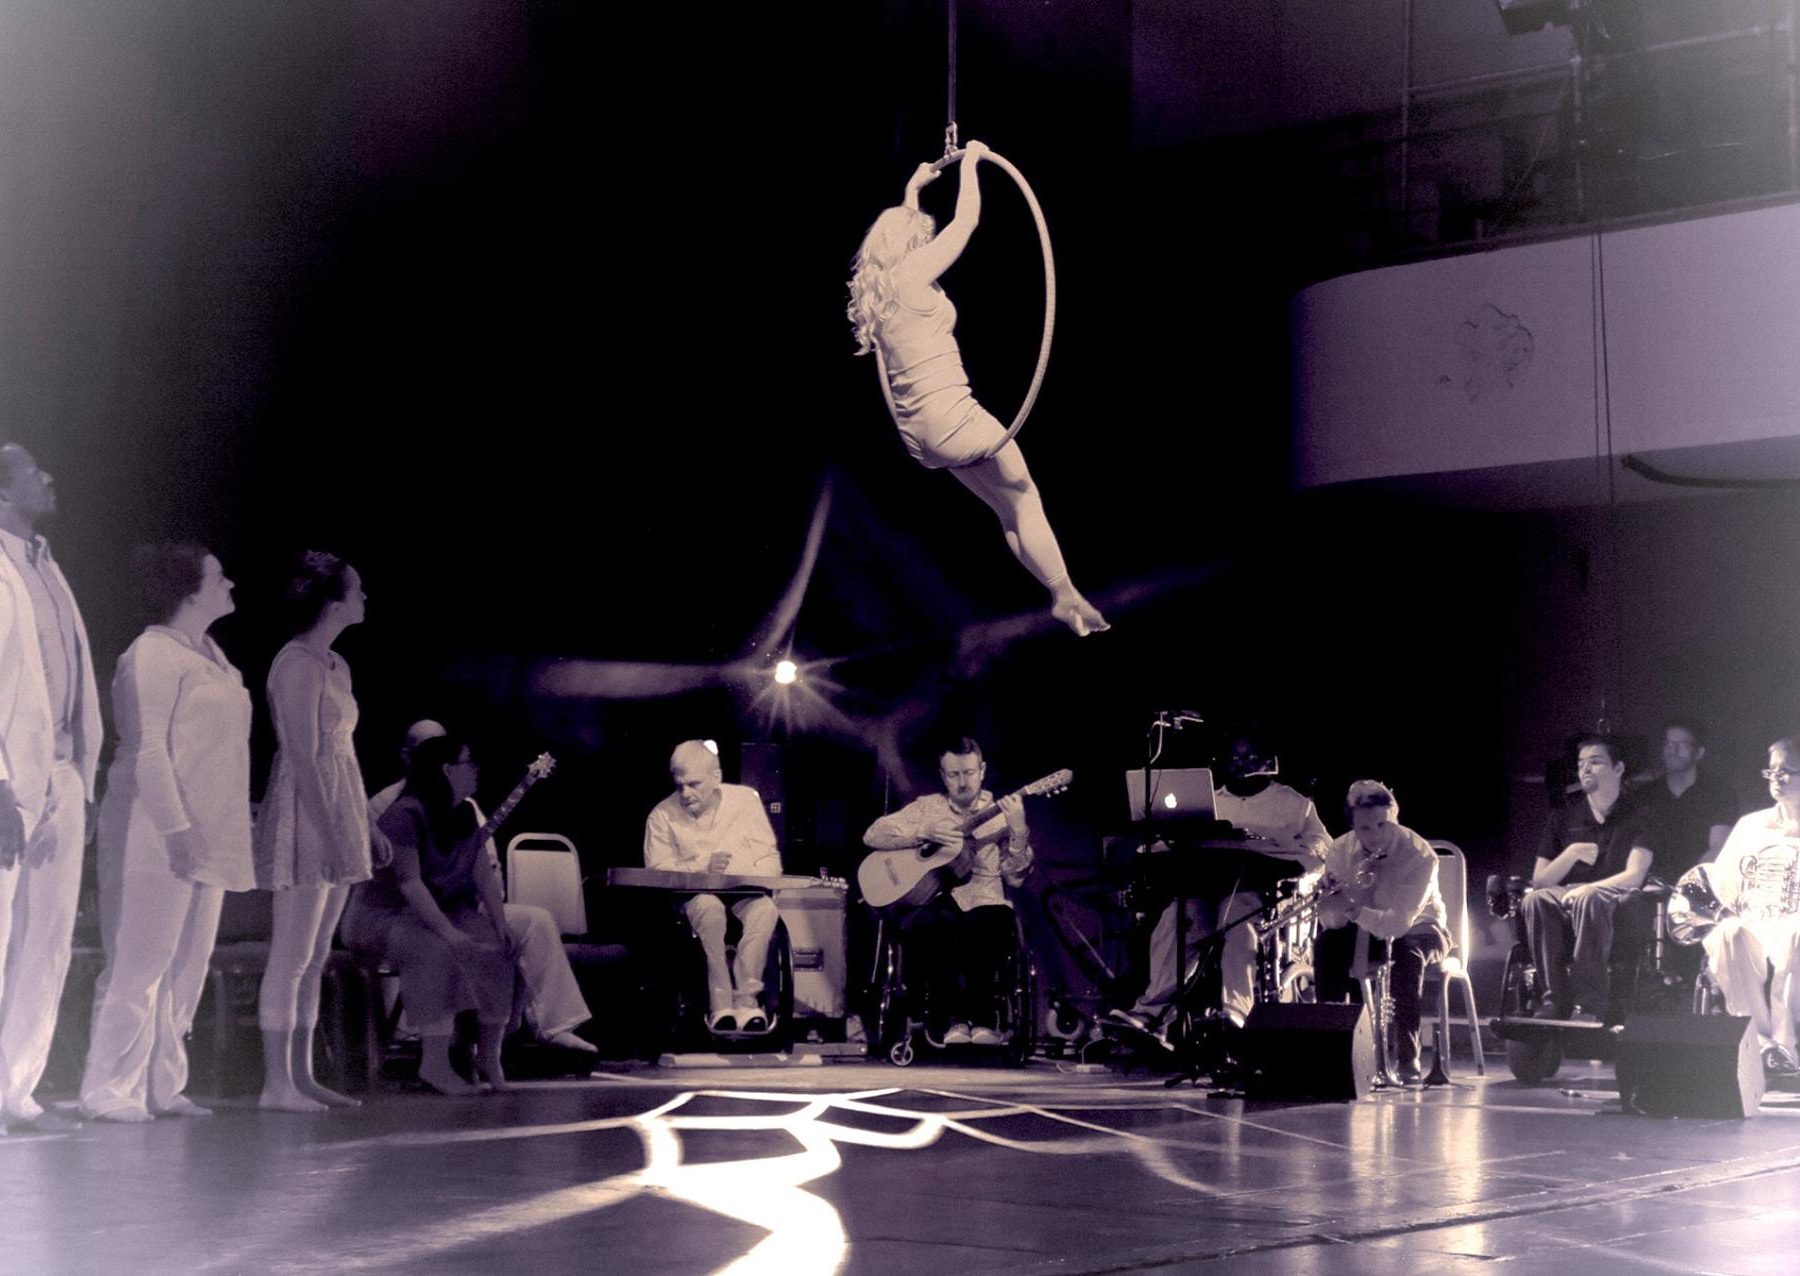 Karina sits on an aerial hoop as part of the Terry Riley 'In C' show. The rest of the cast and the musicians watch her from below.